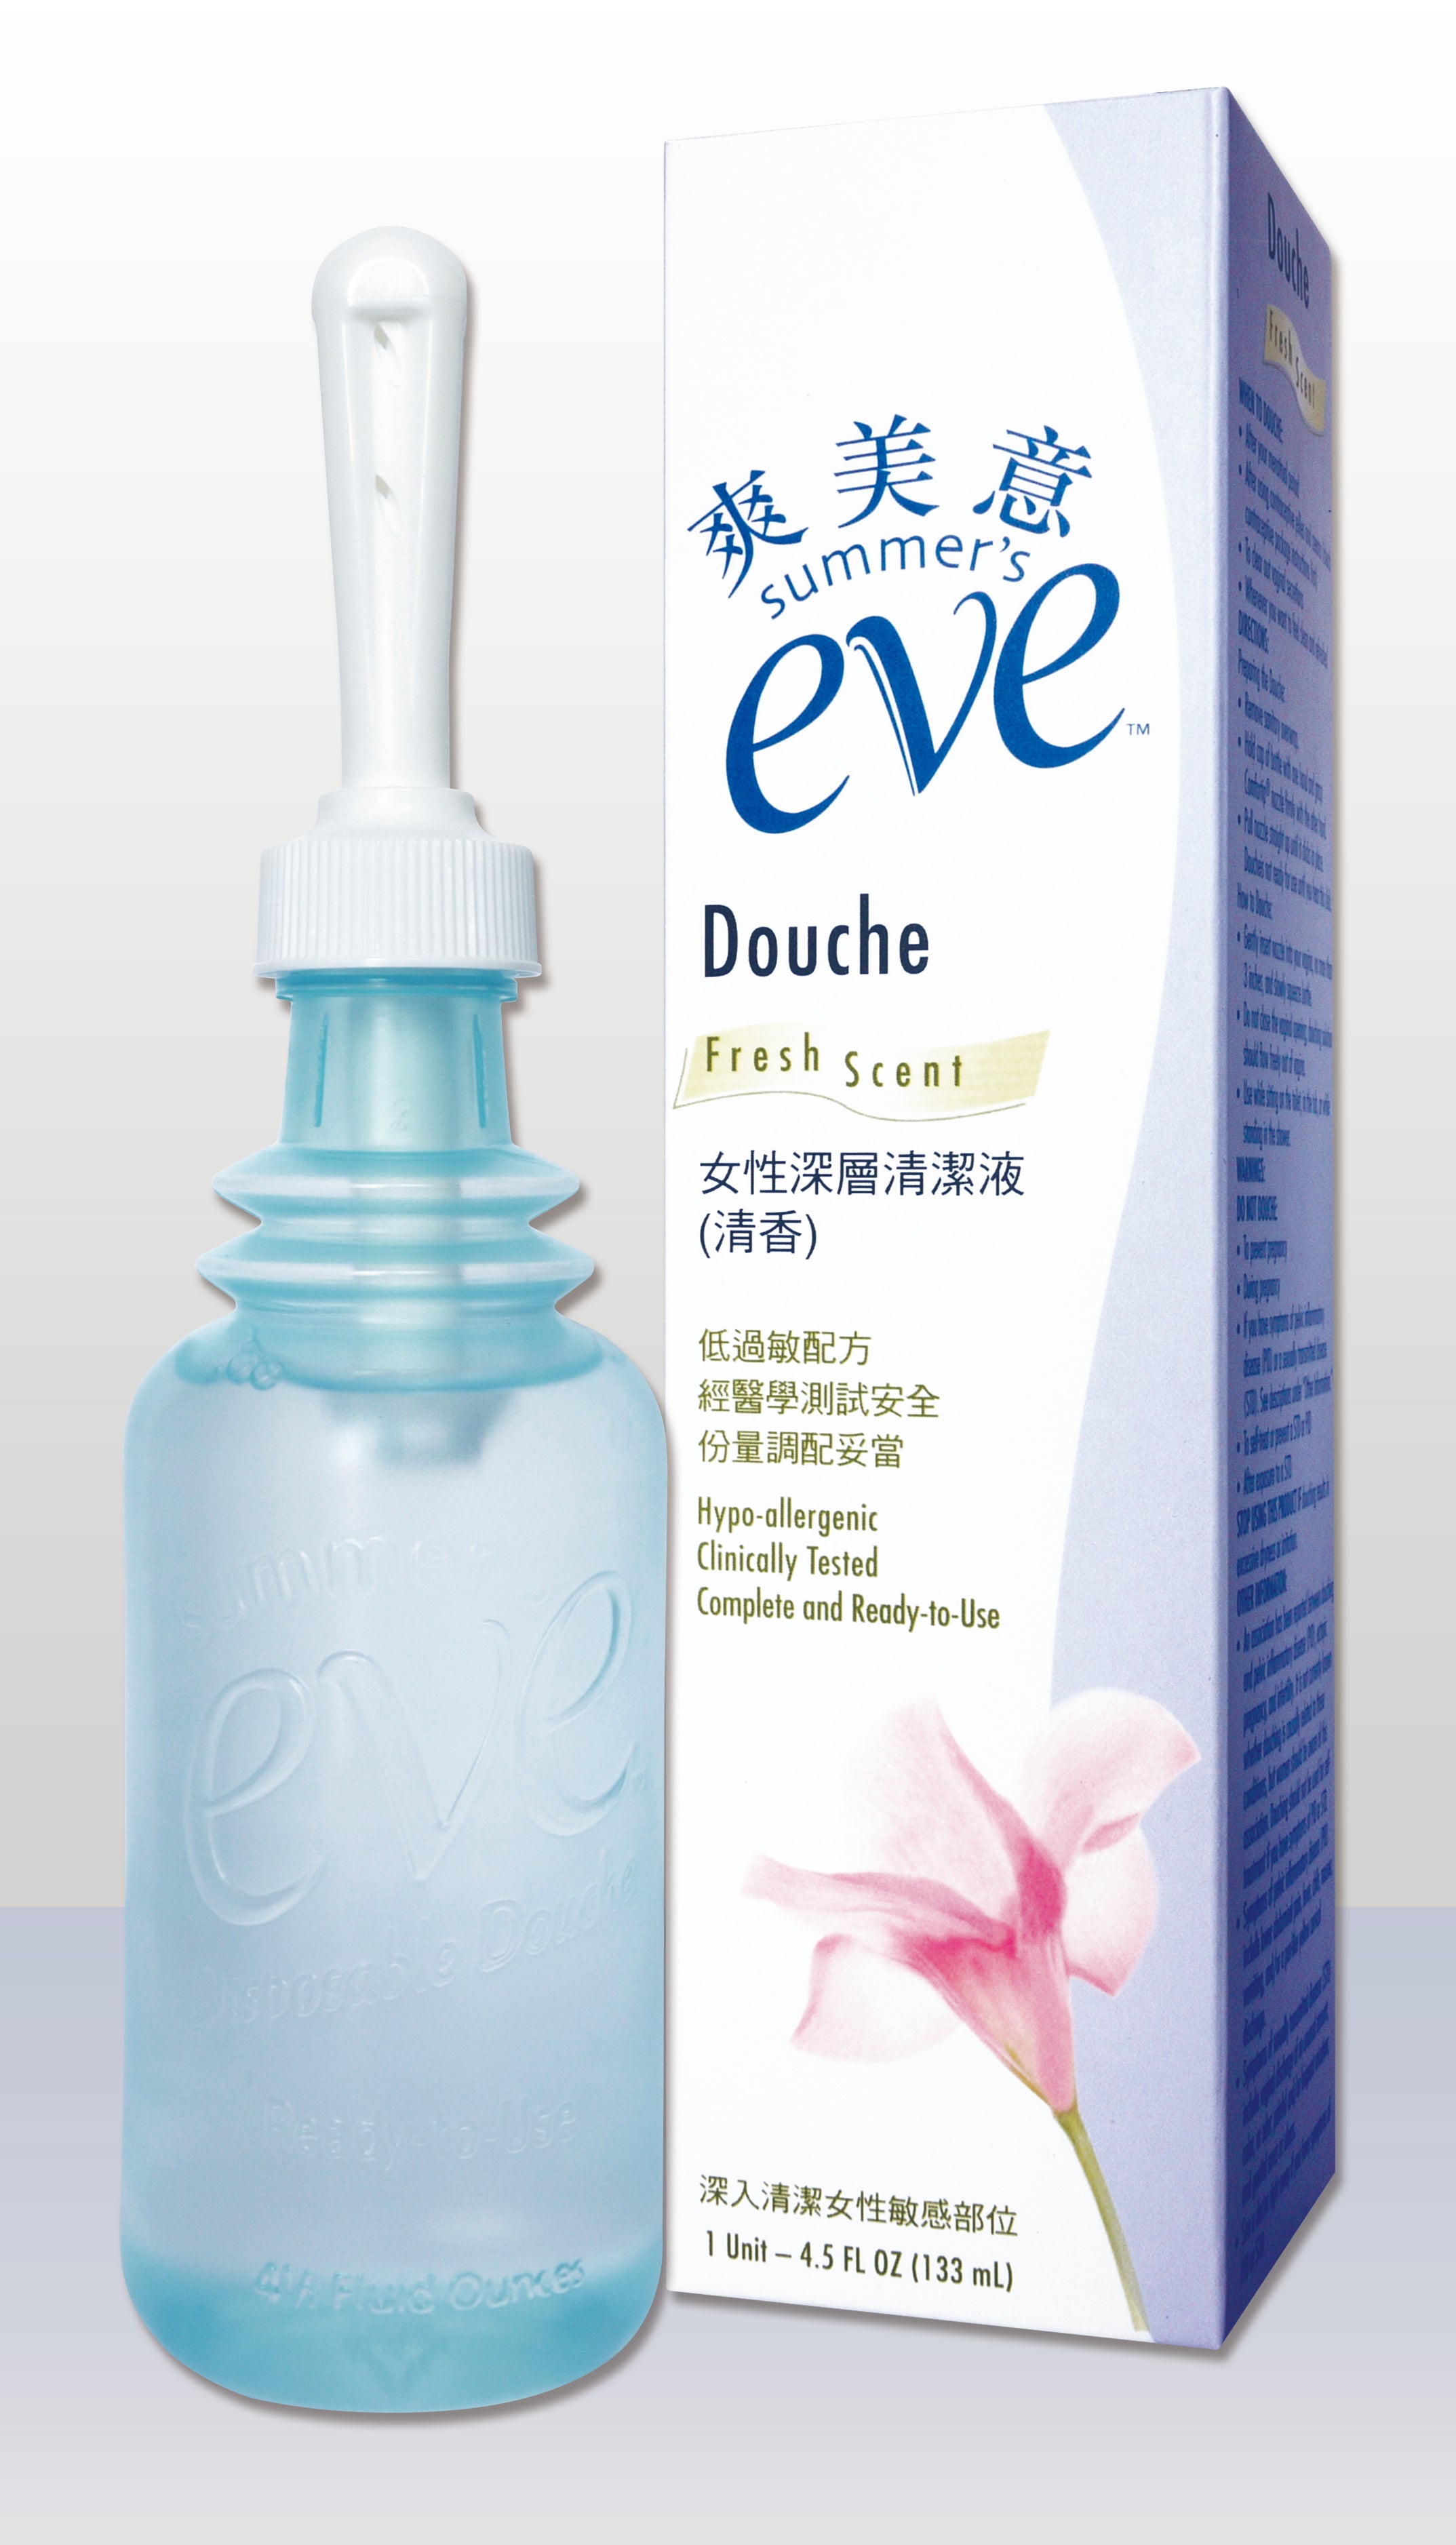 Summers Eve Douche, Fresh Scent